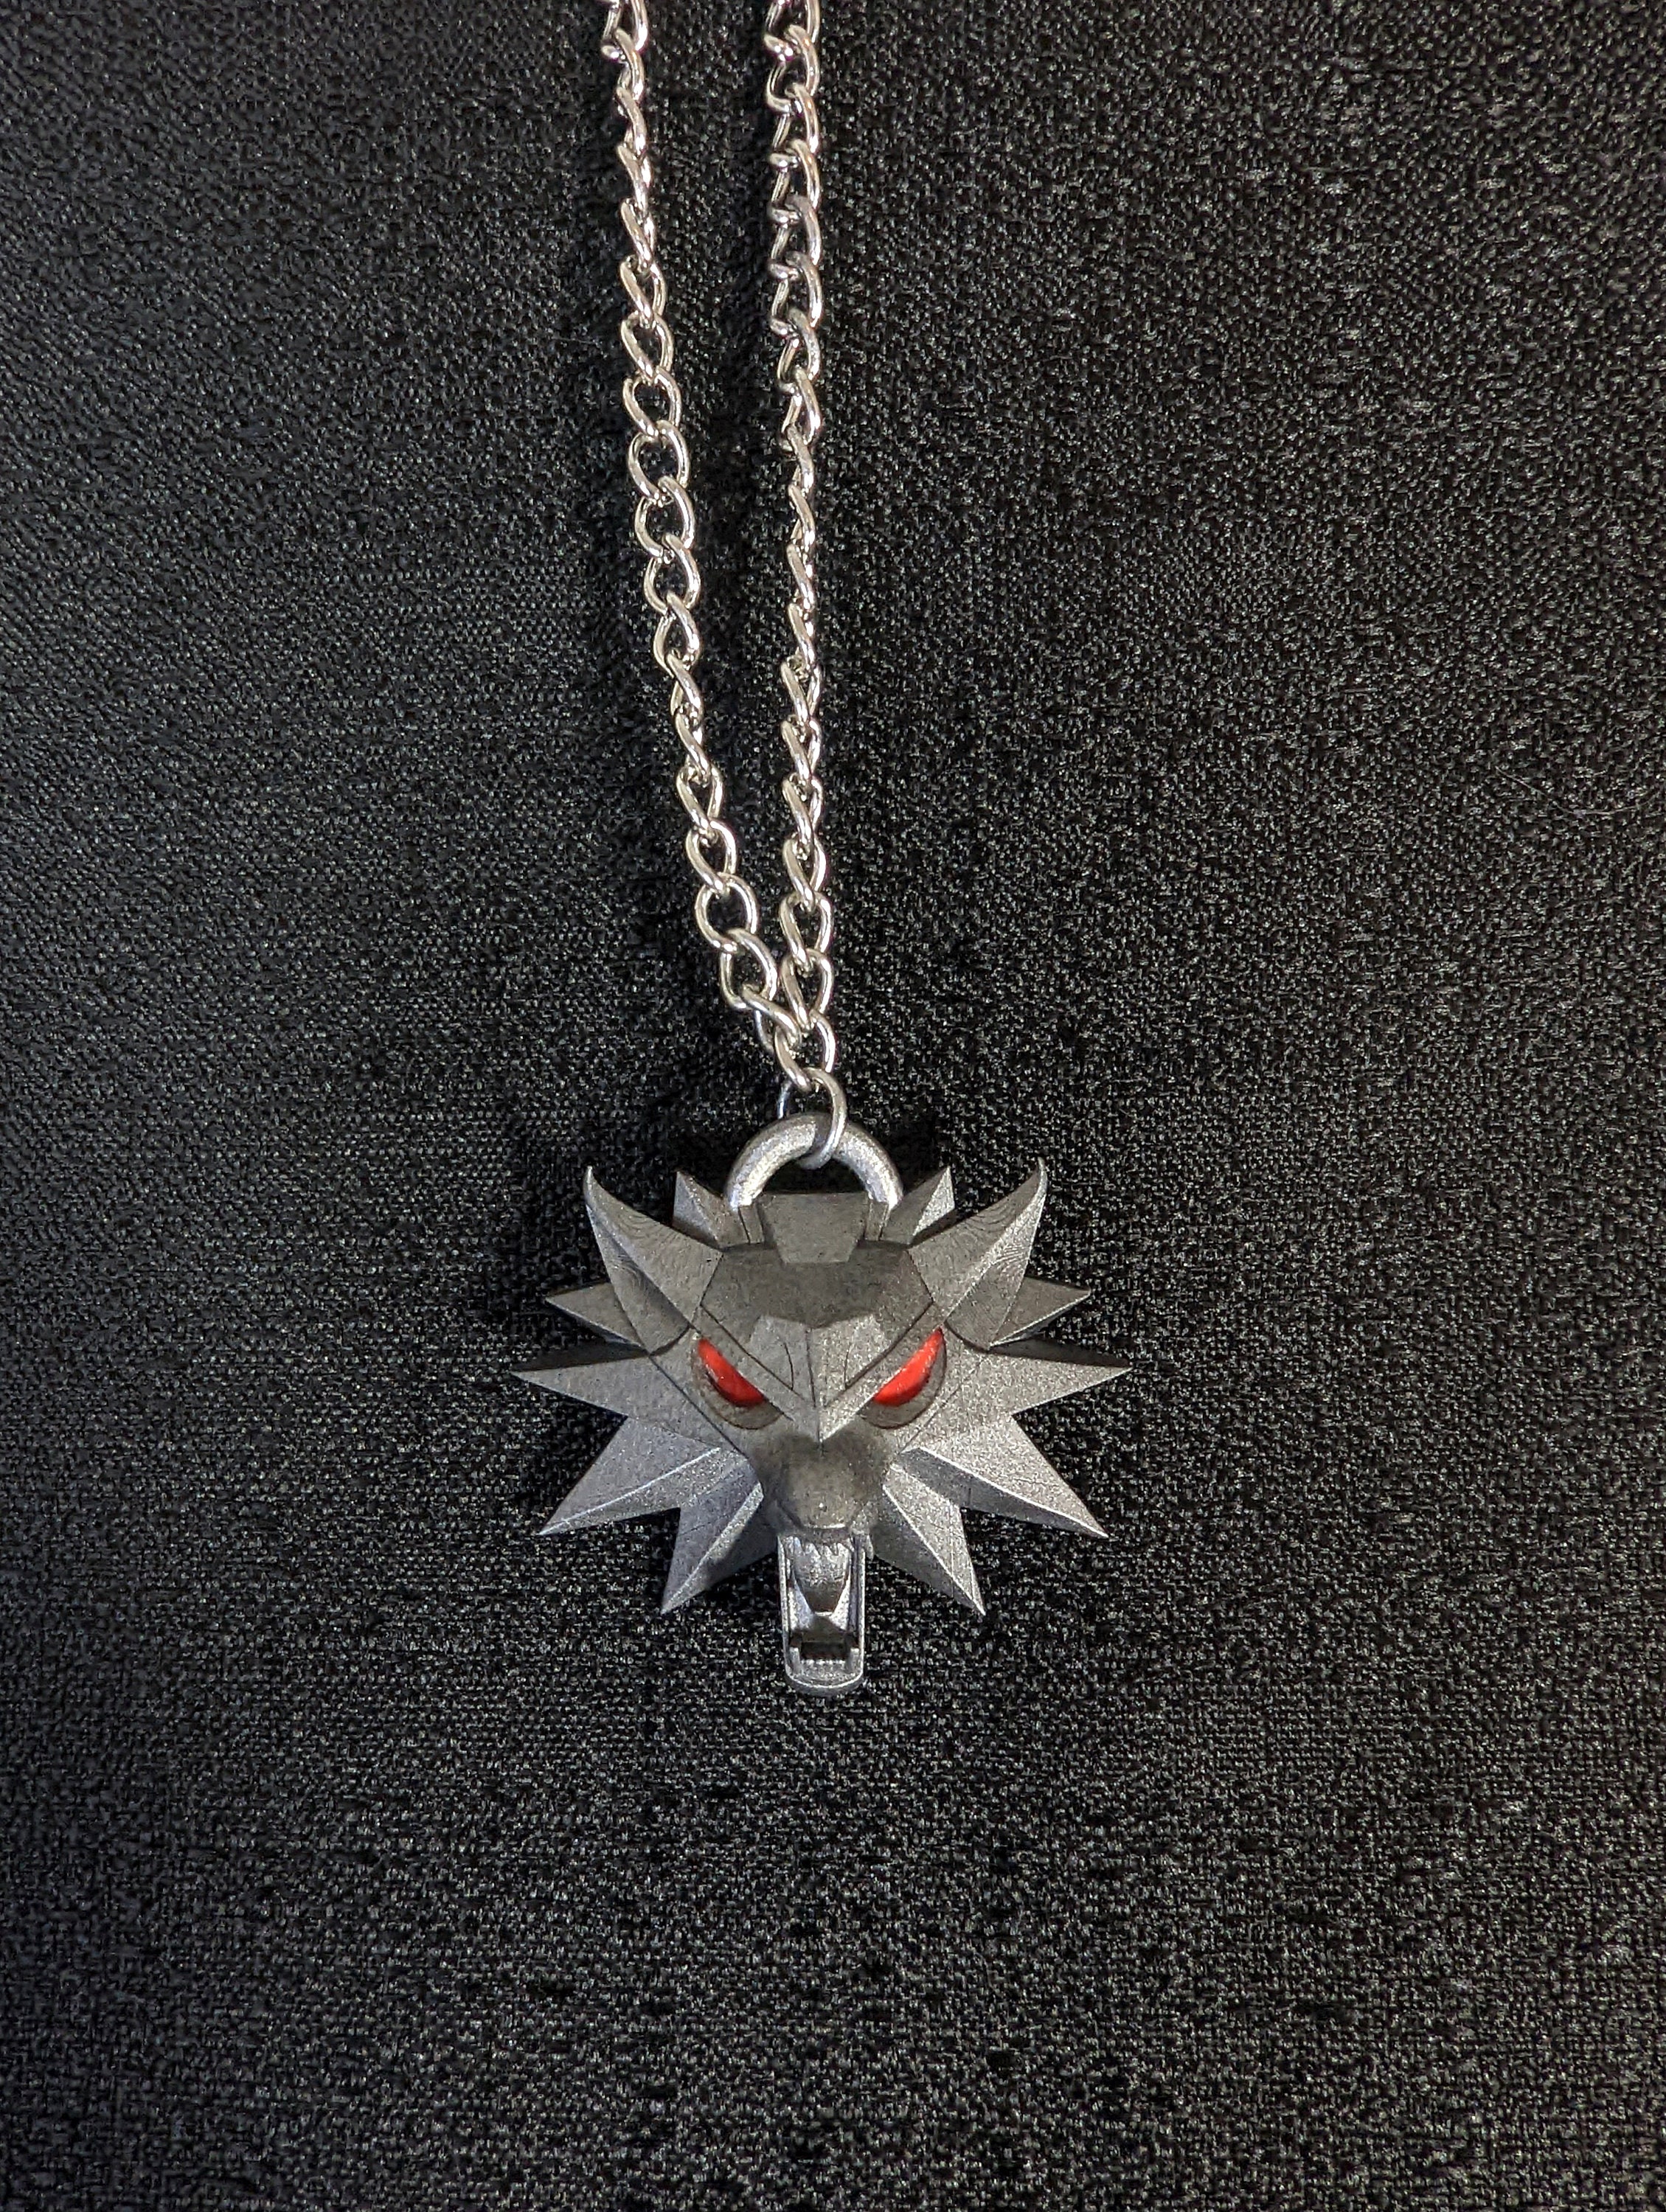 The Witcher 3 Game Geralt Wolf Medallion Necklace With Silver Chain -  .de